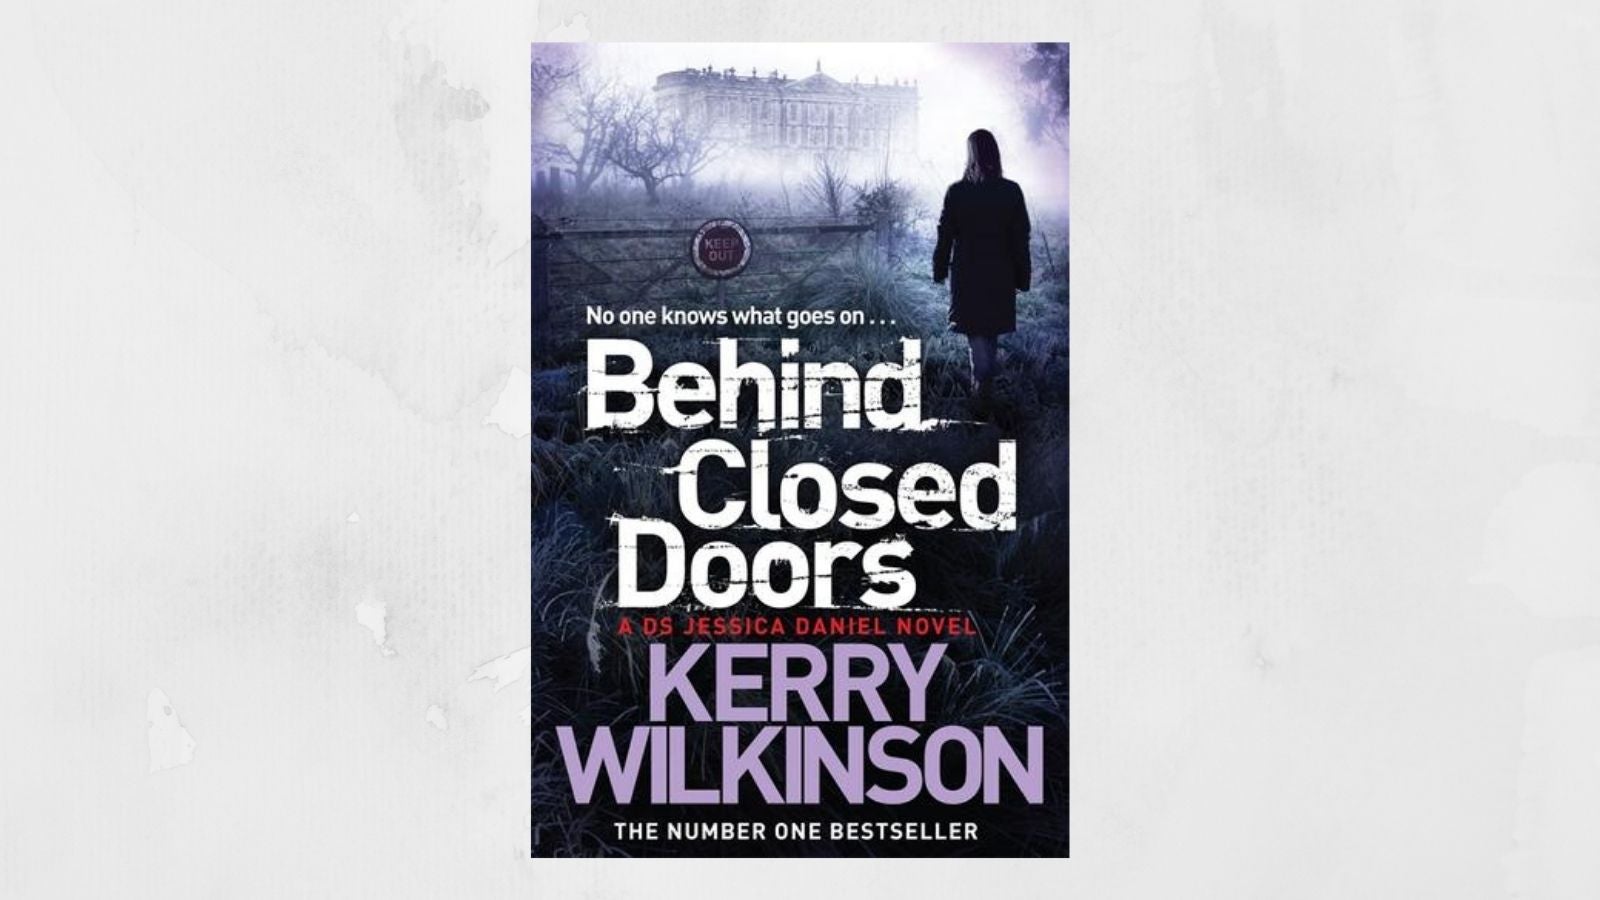 Behind Closed Doors by Kerry Wilkinson book cover